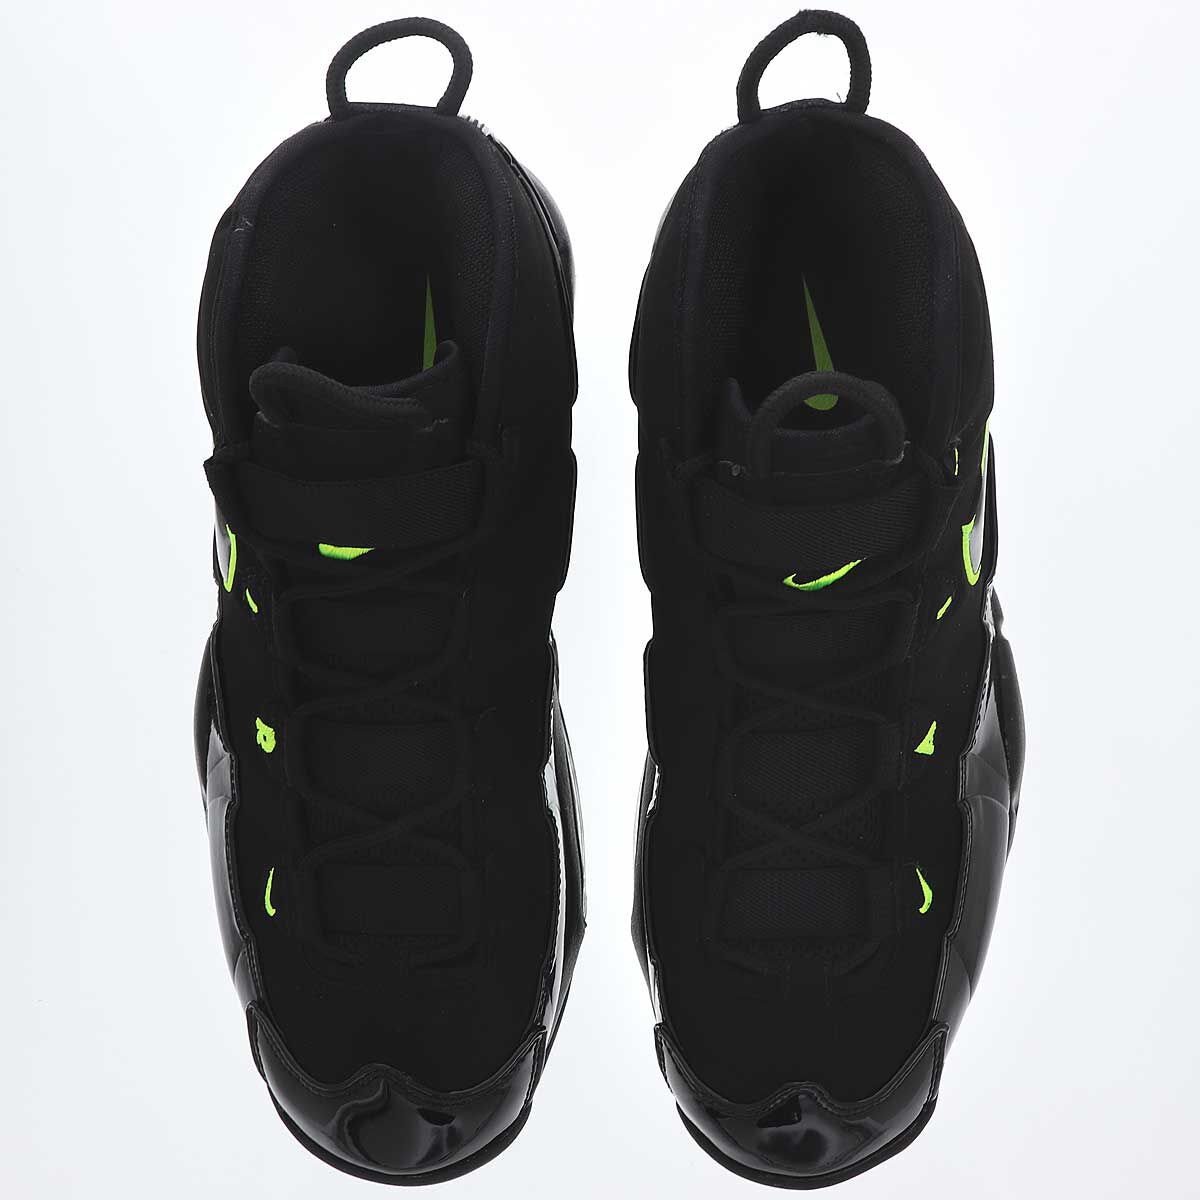 nike uptempo 95 black and green